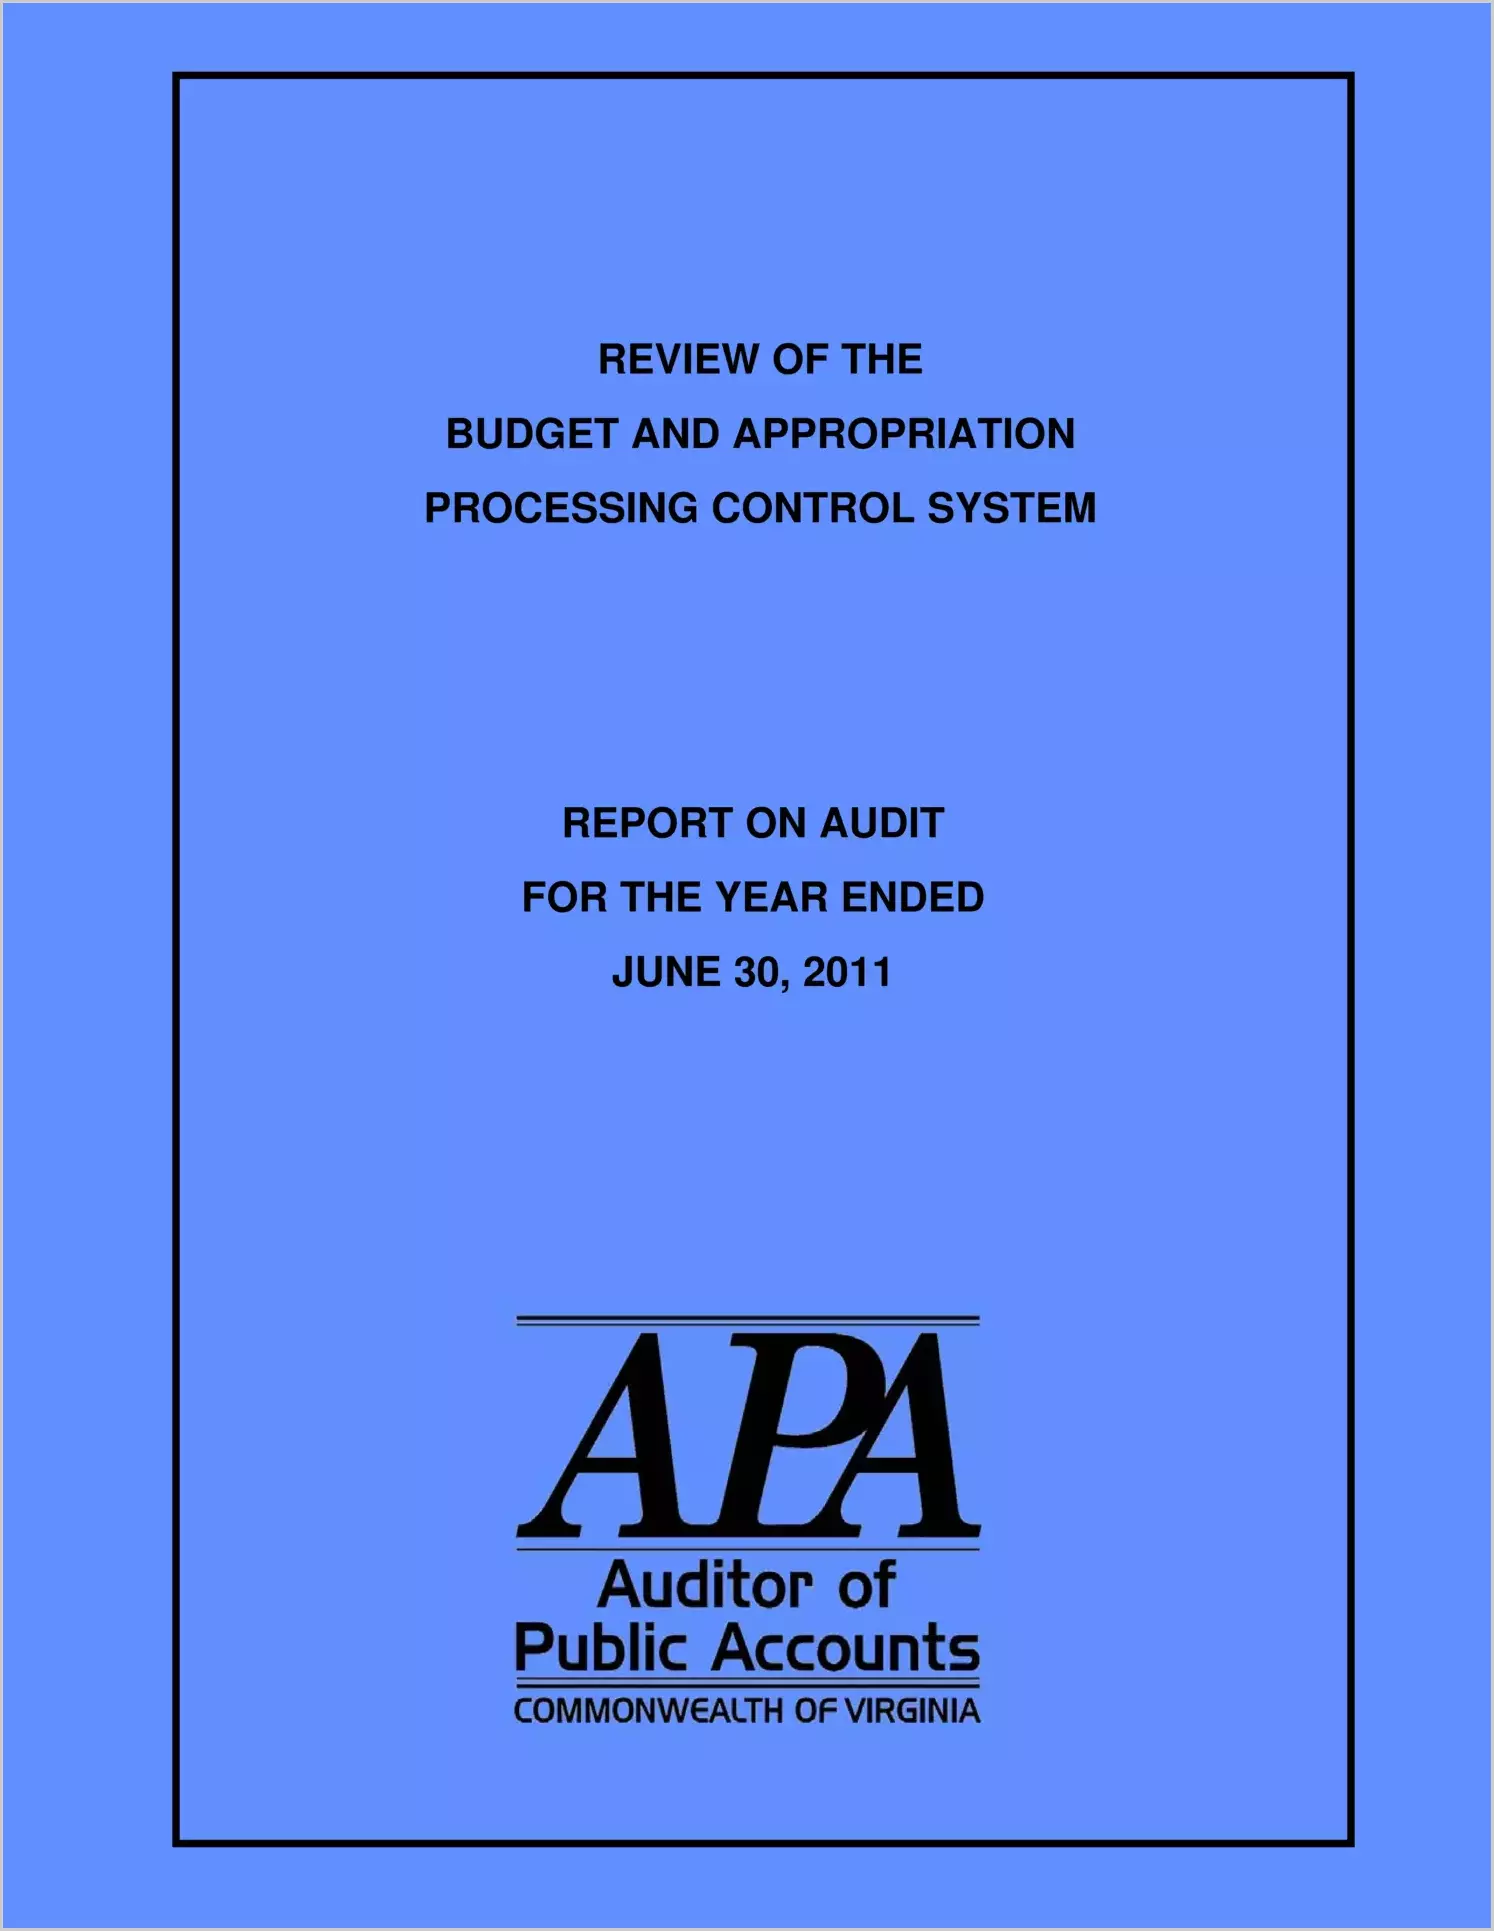 Review of the Budget and Appropriation Processing Control System for the fiscal year ended June 30, 2011